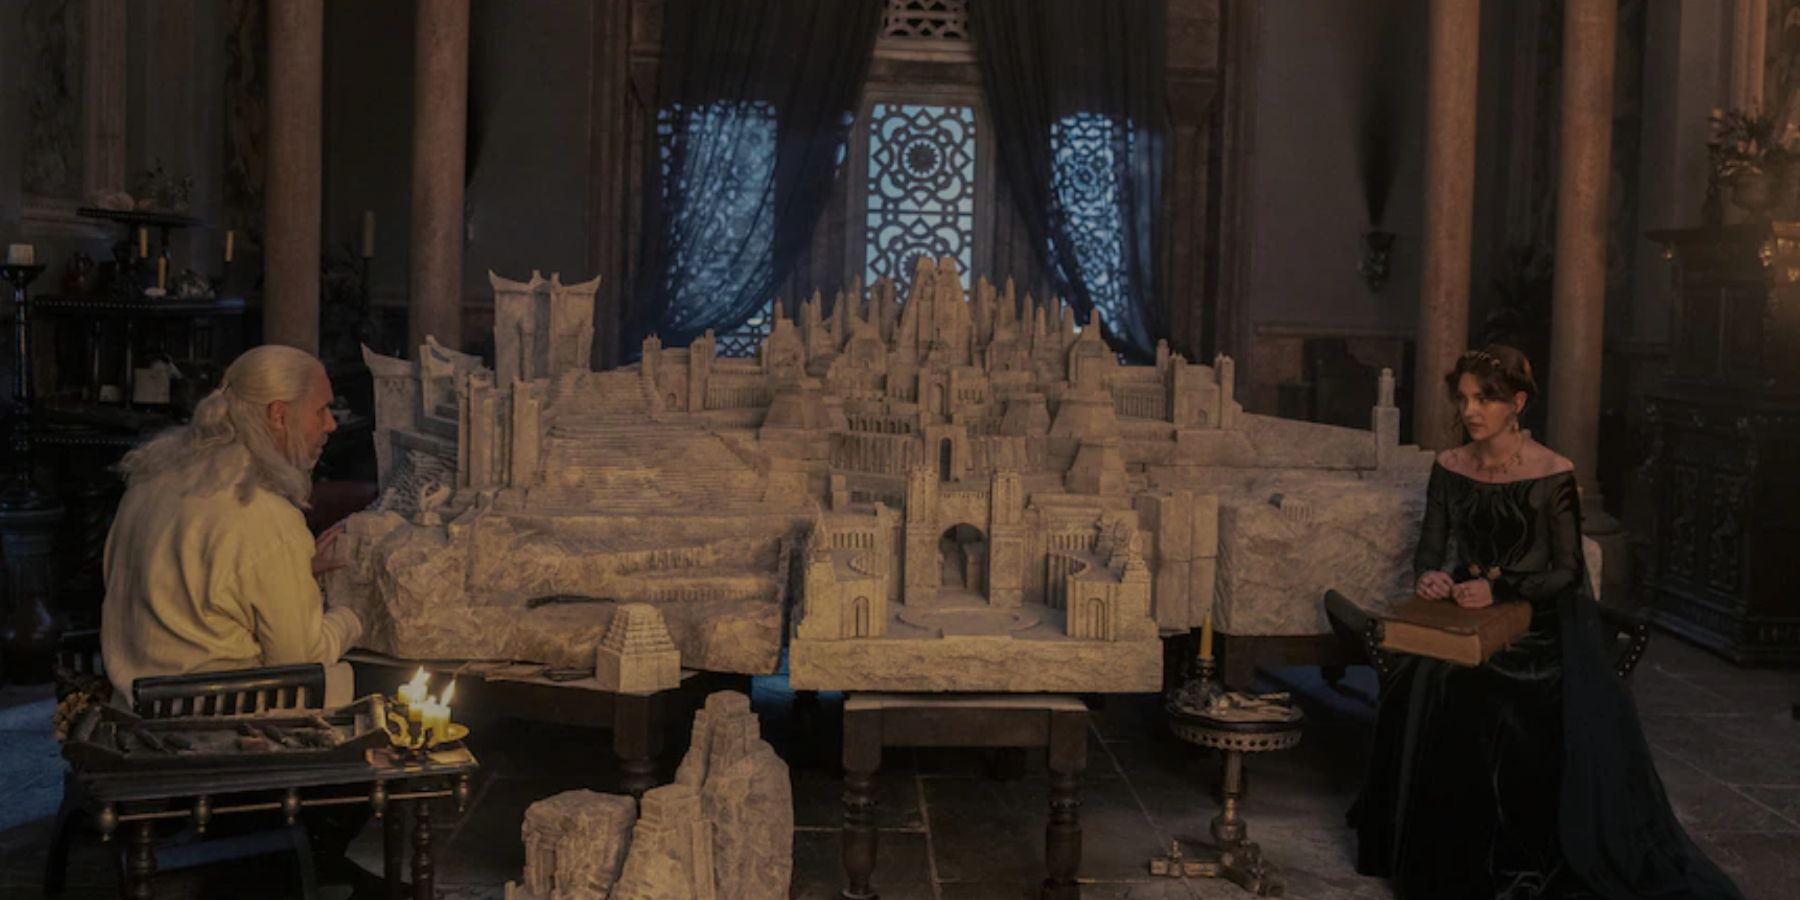 Viserys I Targaryen and Alicent Hightower in front of the model city of Old Valyria in House of the Dragon.